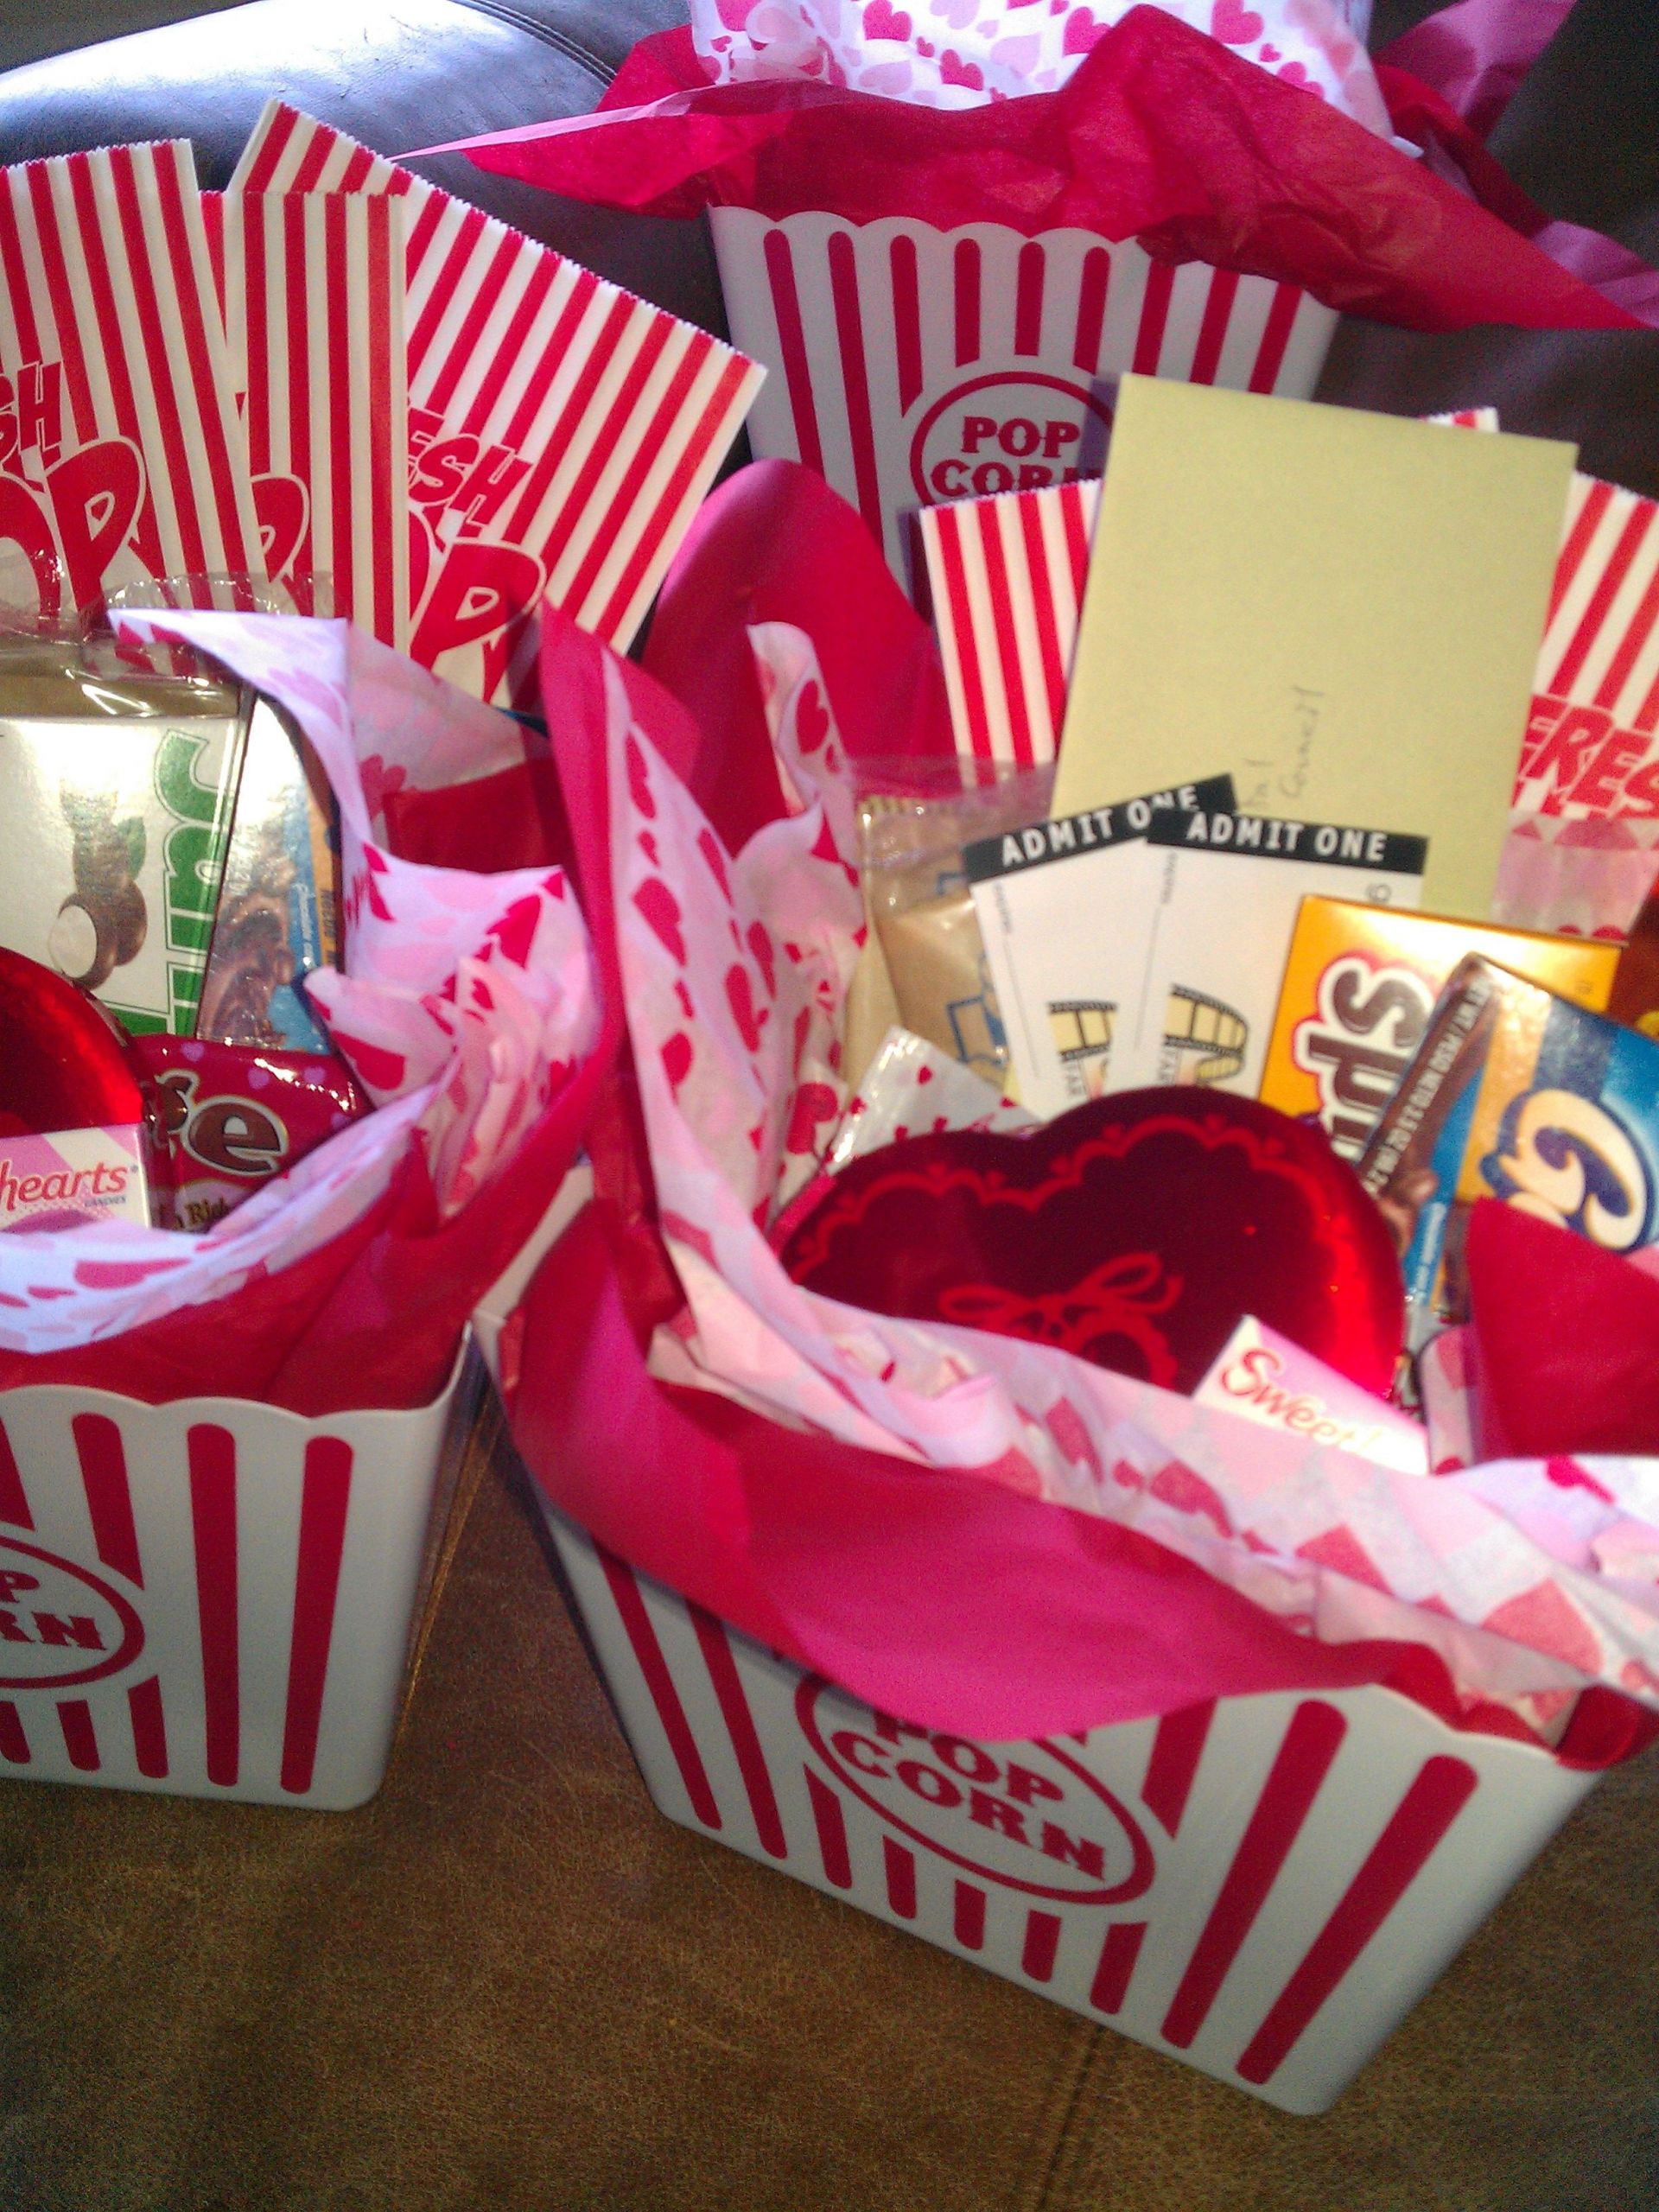 Valentines Day Gift Baskets Kids
 Valentines Day Movie Baskets Would be fun to make a